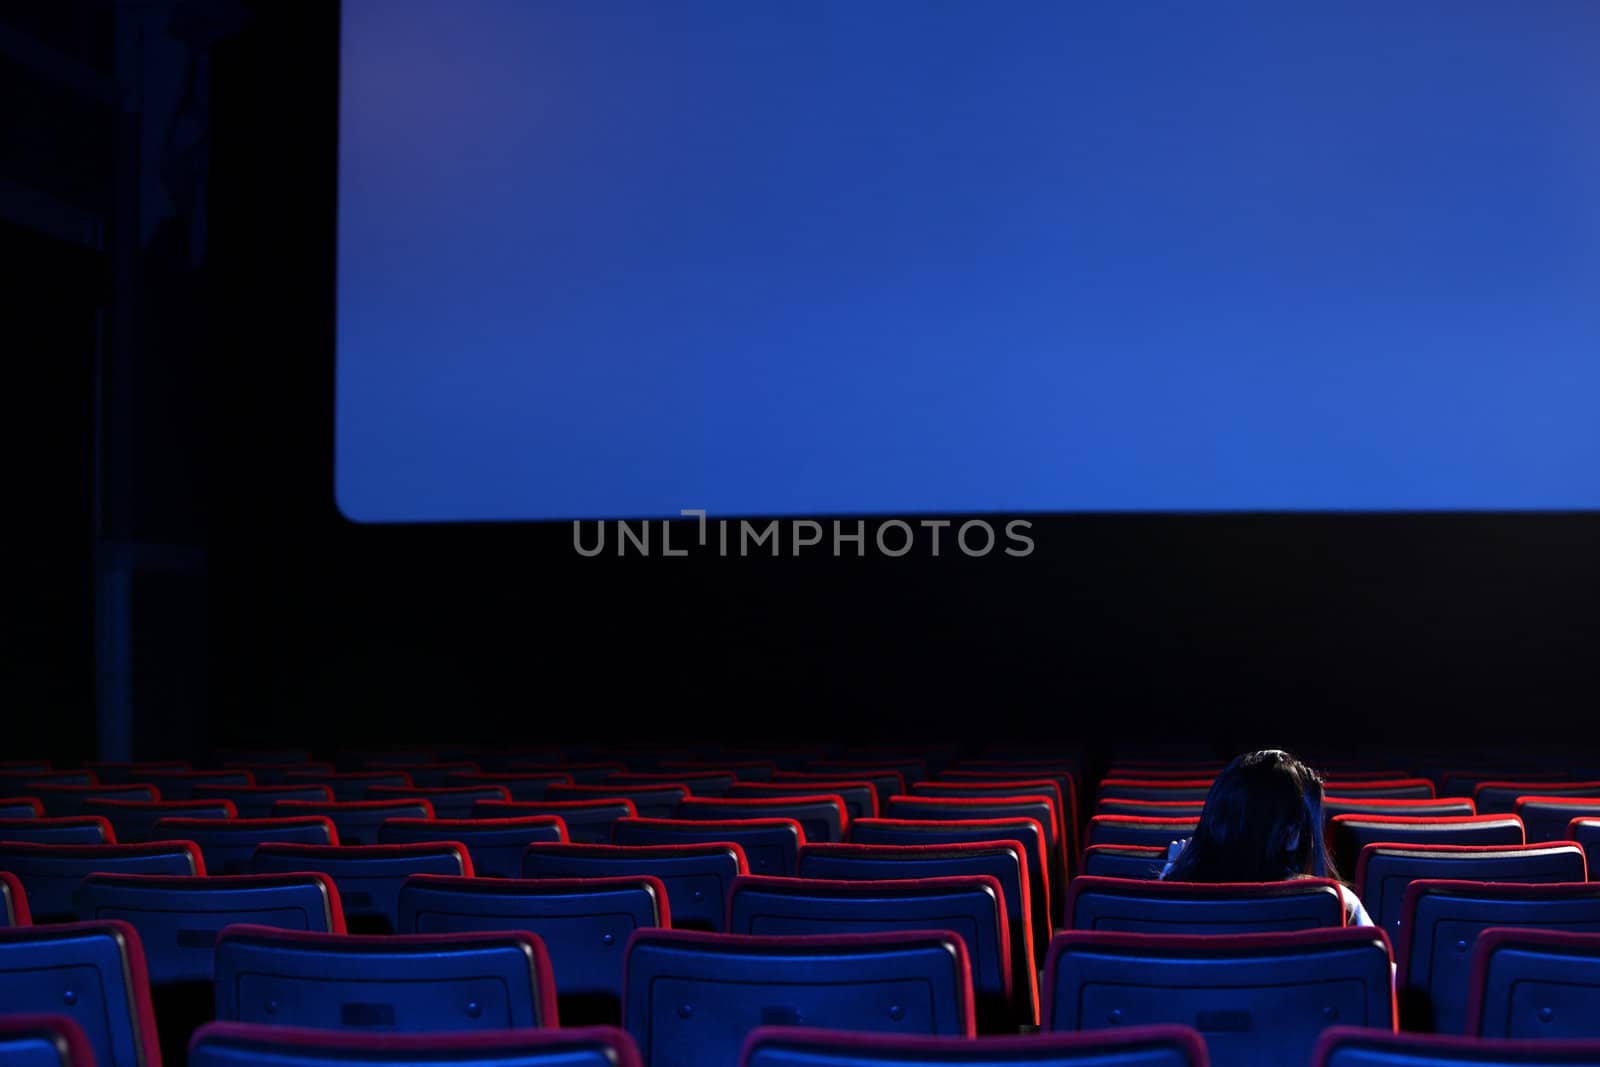 the end: youn woman  alone sitting in a empty movie theater,rear view